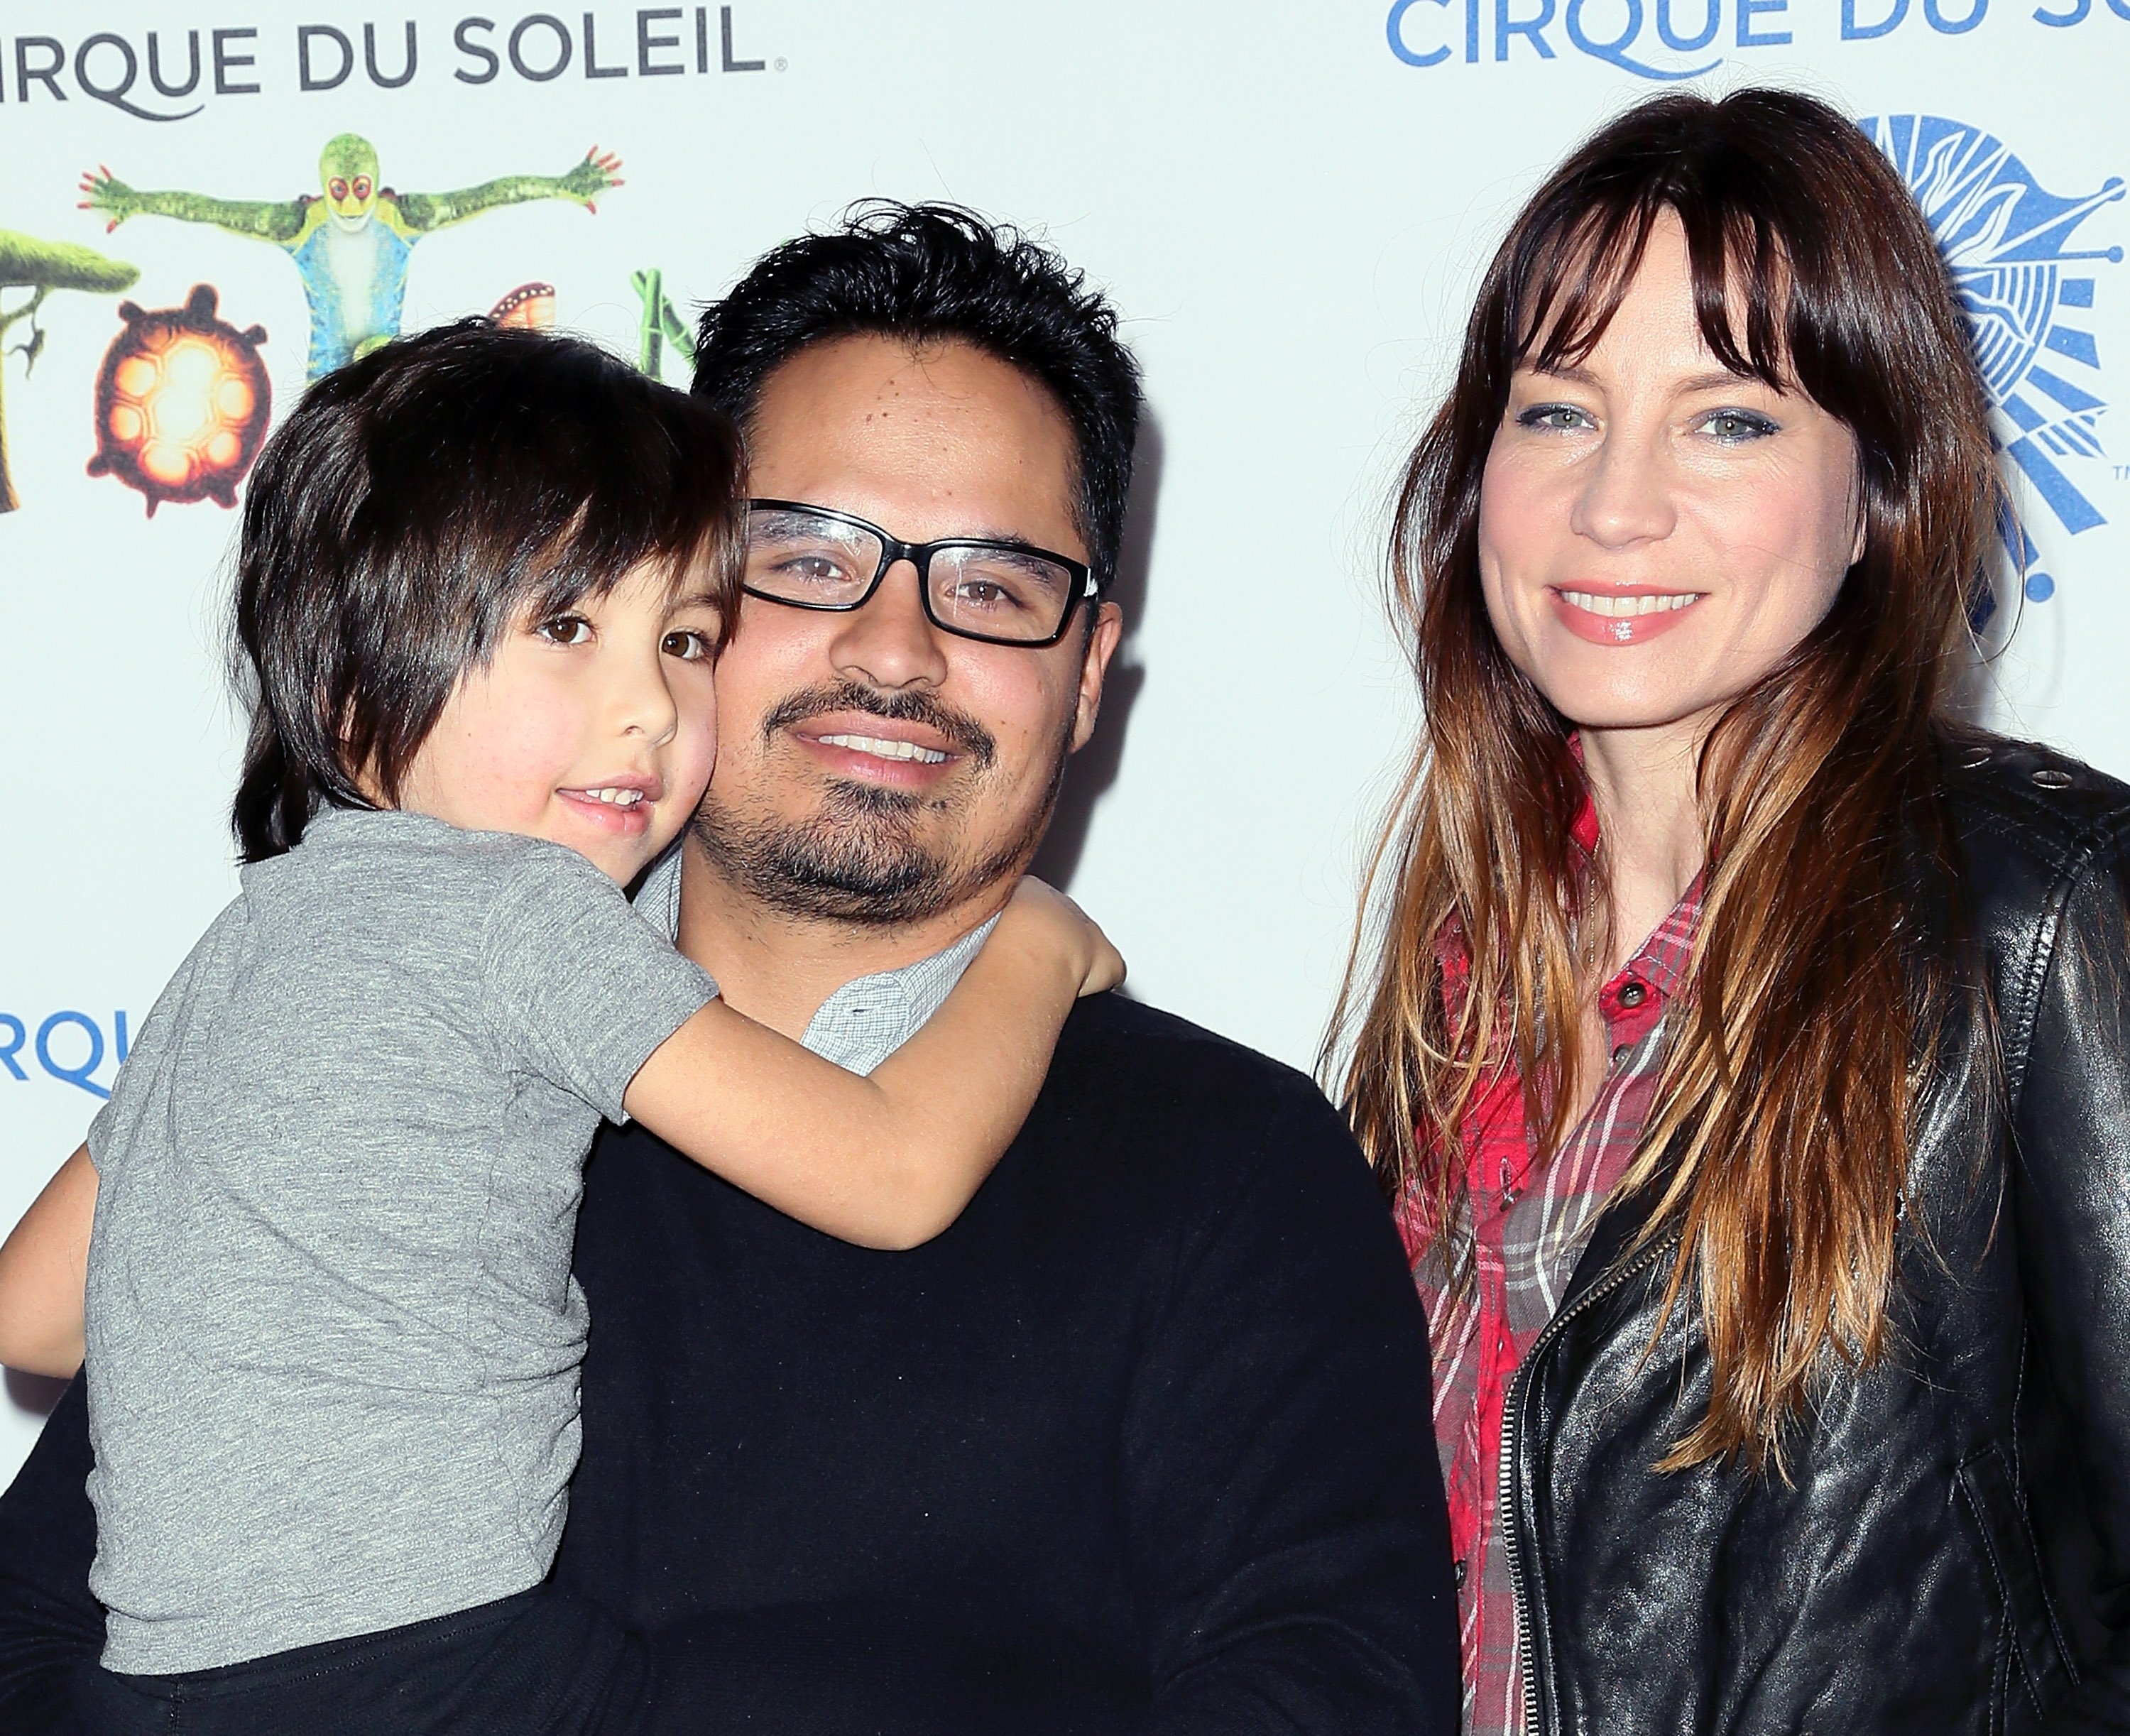 (L-R) Roman Pena, actor Michael Pena and his wife Brie Shaffer attend opening night of Cirque du Soleil's "Totem" at the Santa Monica Pier on January 21, 2014, in Santa Monica, California. | Source: Getty Images